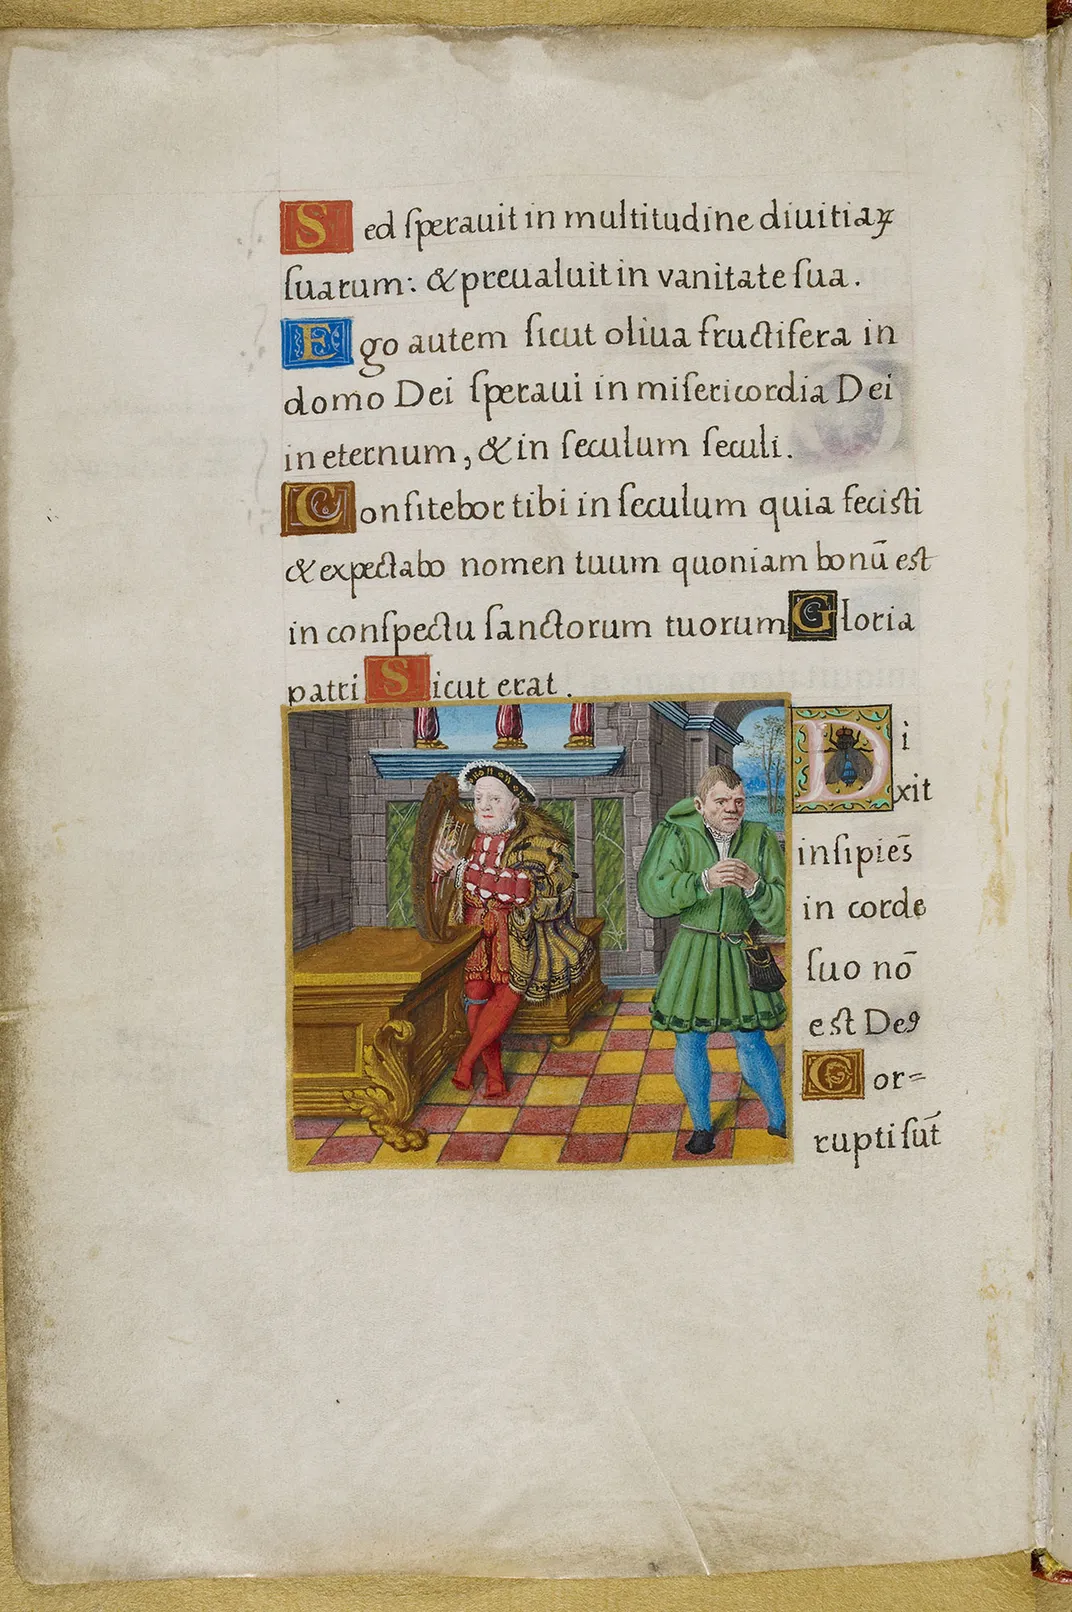 Page from Henry's psalter, featuring an illustration of him as King David